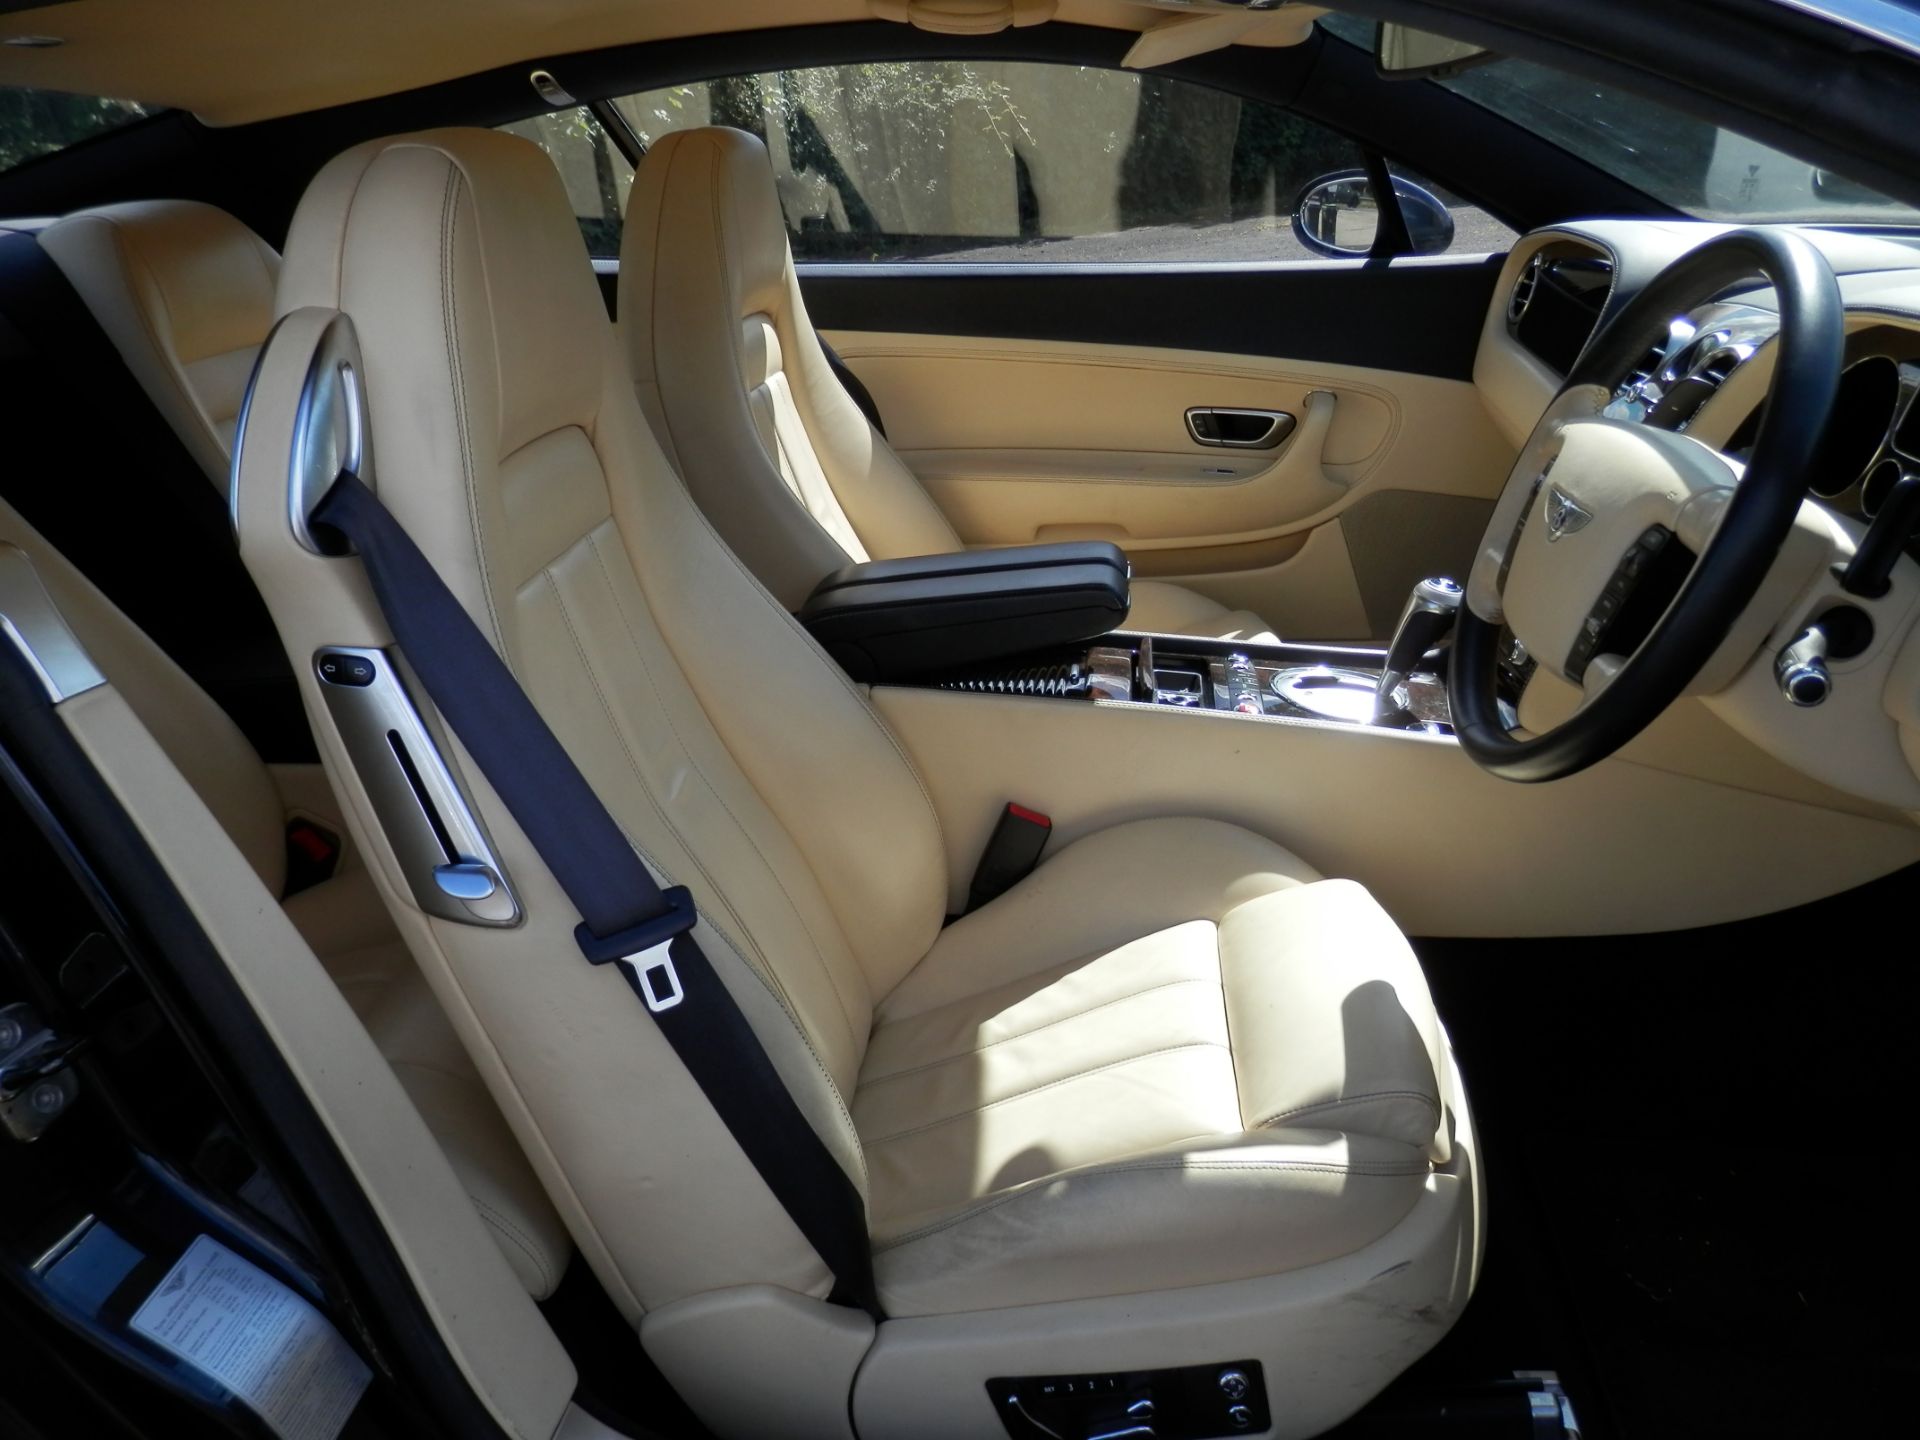 STUNNING 2007 BENTLEY GT CONTINENTAL, 6.0L TWIN TURBO,35K MILES, BLUE, CREAM LEATHER, FULL HISTORY. - Image 13 of 53